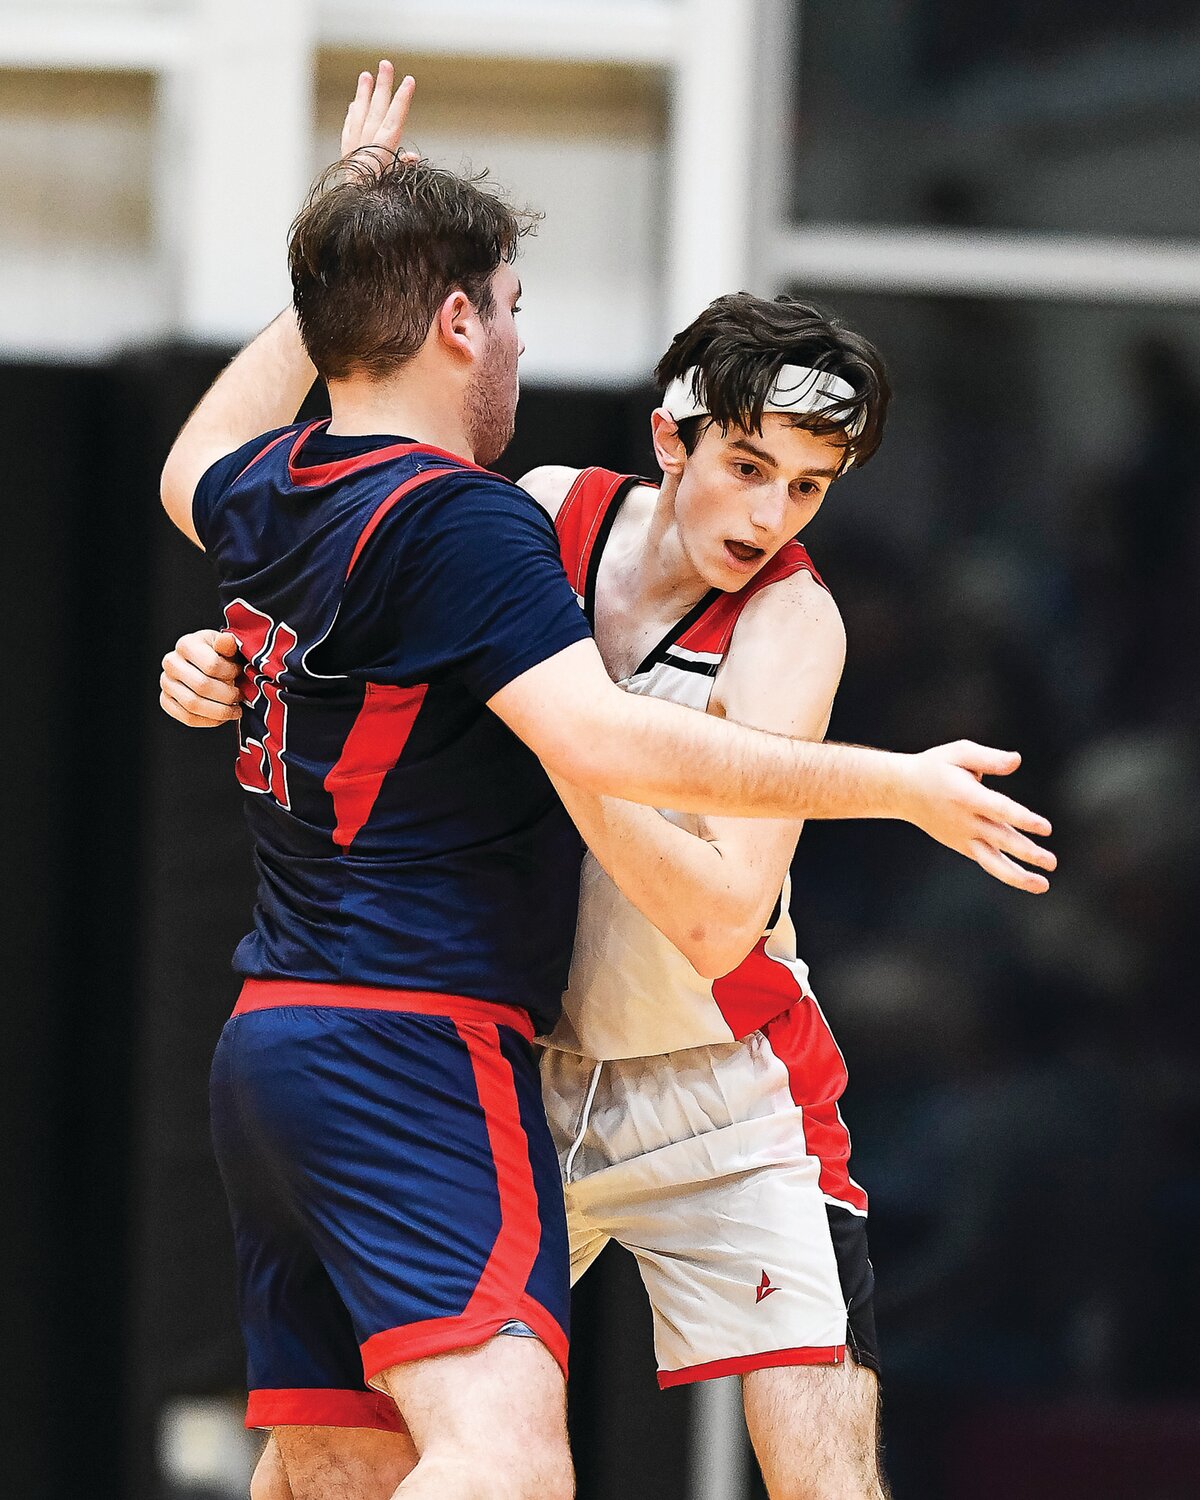 Plumstead Christian’s Jordan Eade and Jenkintown’s Tommy Walsh get tangled up during an inbound pass.